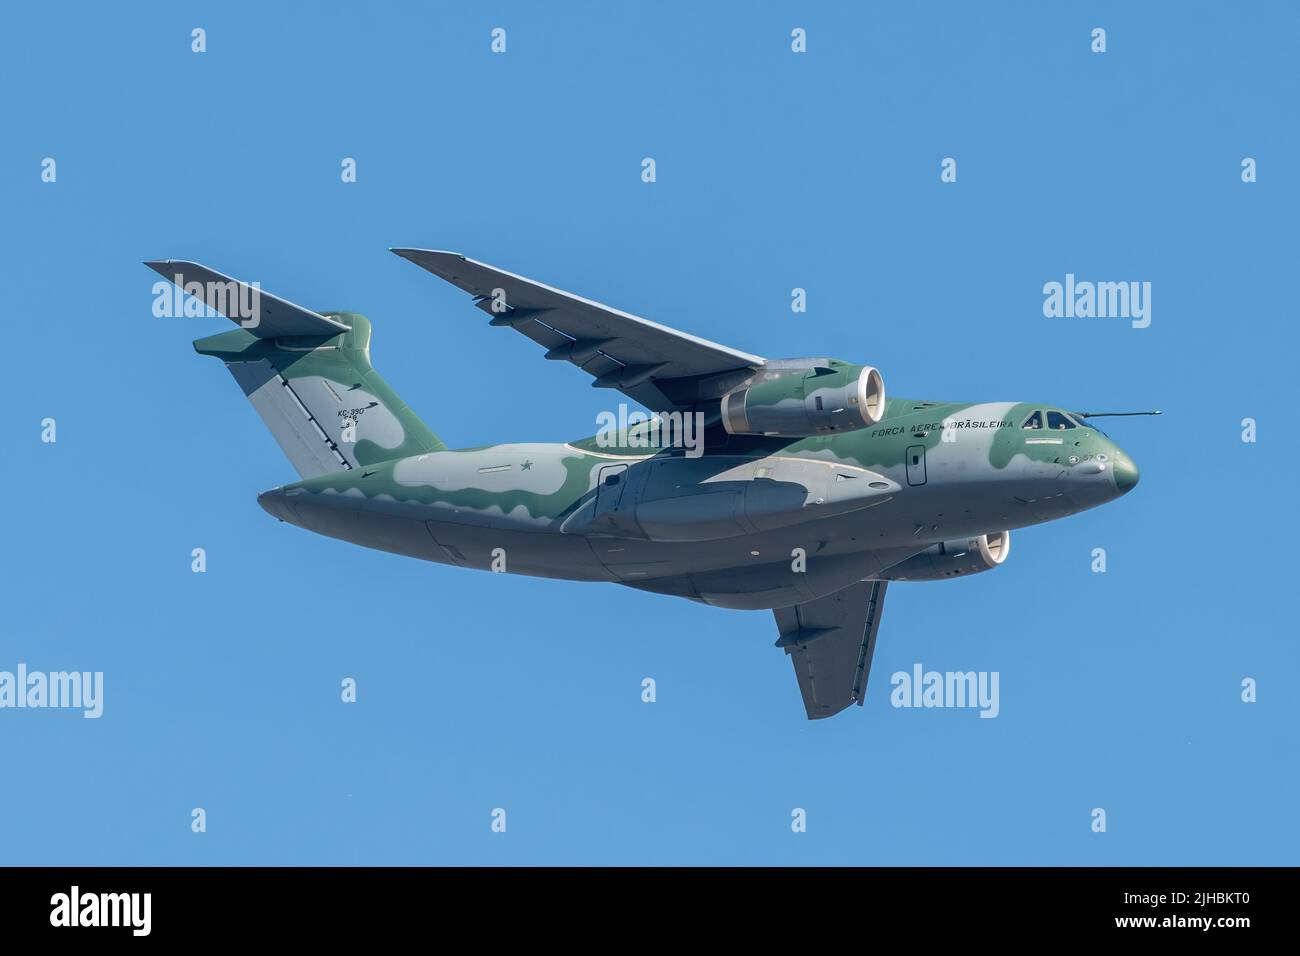 Farnborough Airshow, July 2022. A KC390 transport plane owned by the Força Aérea Brasileira in flight a few days before the airshow begins. Stock Photo